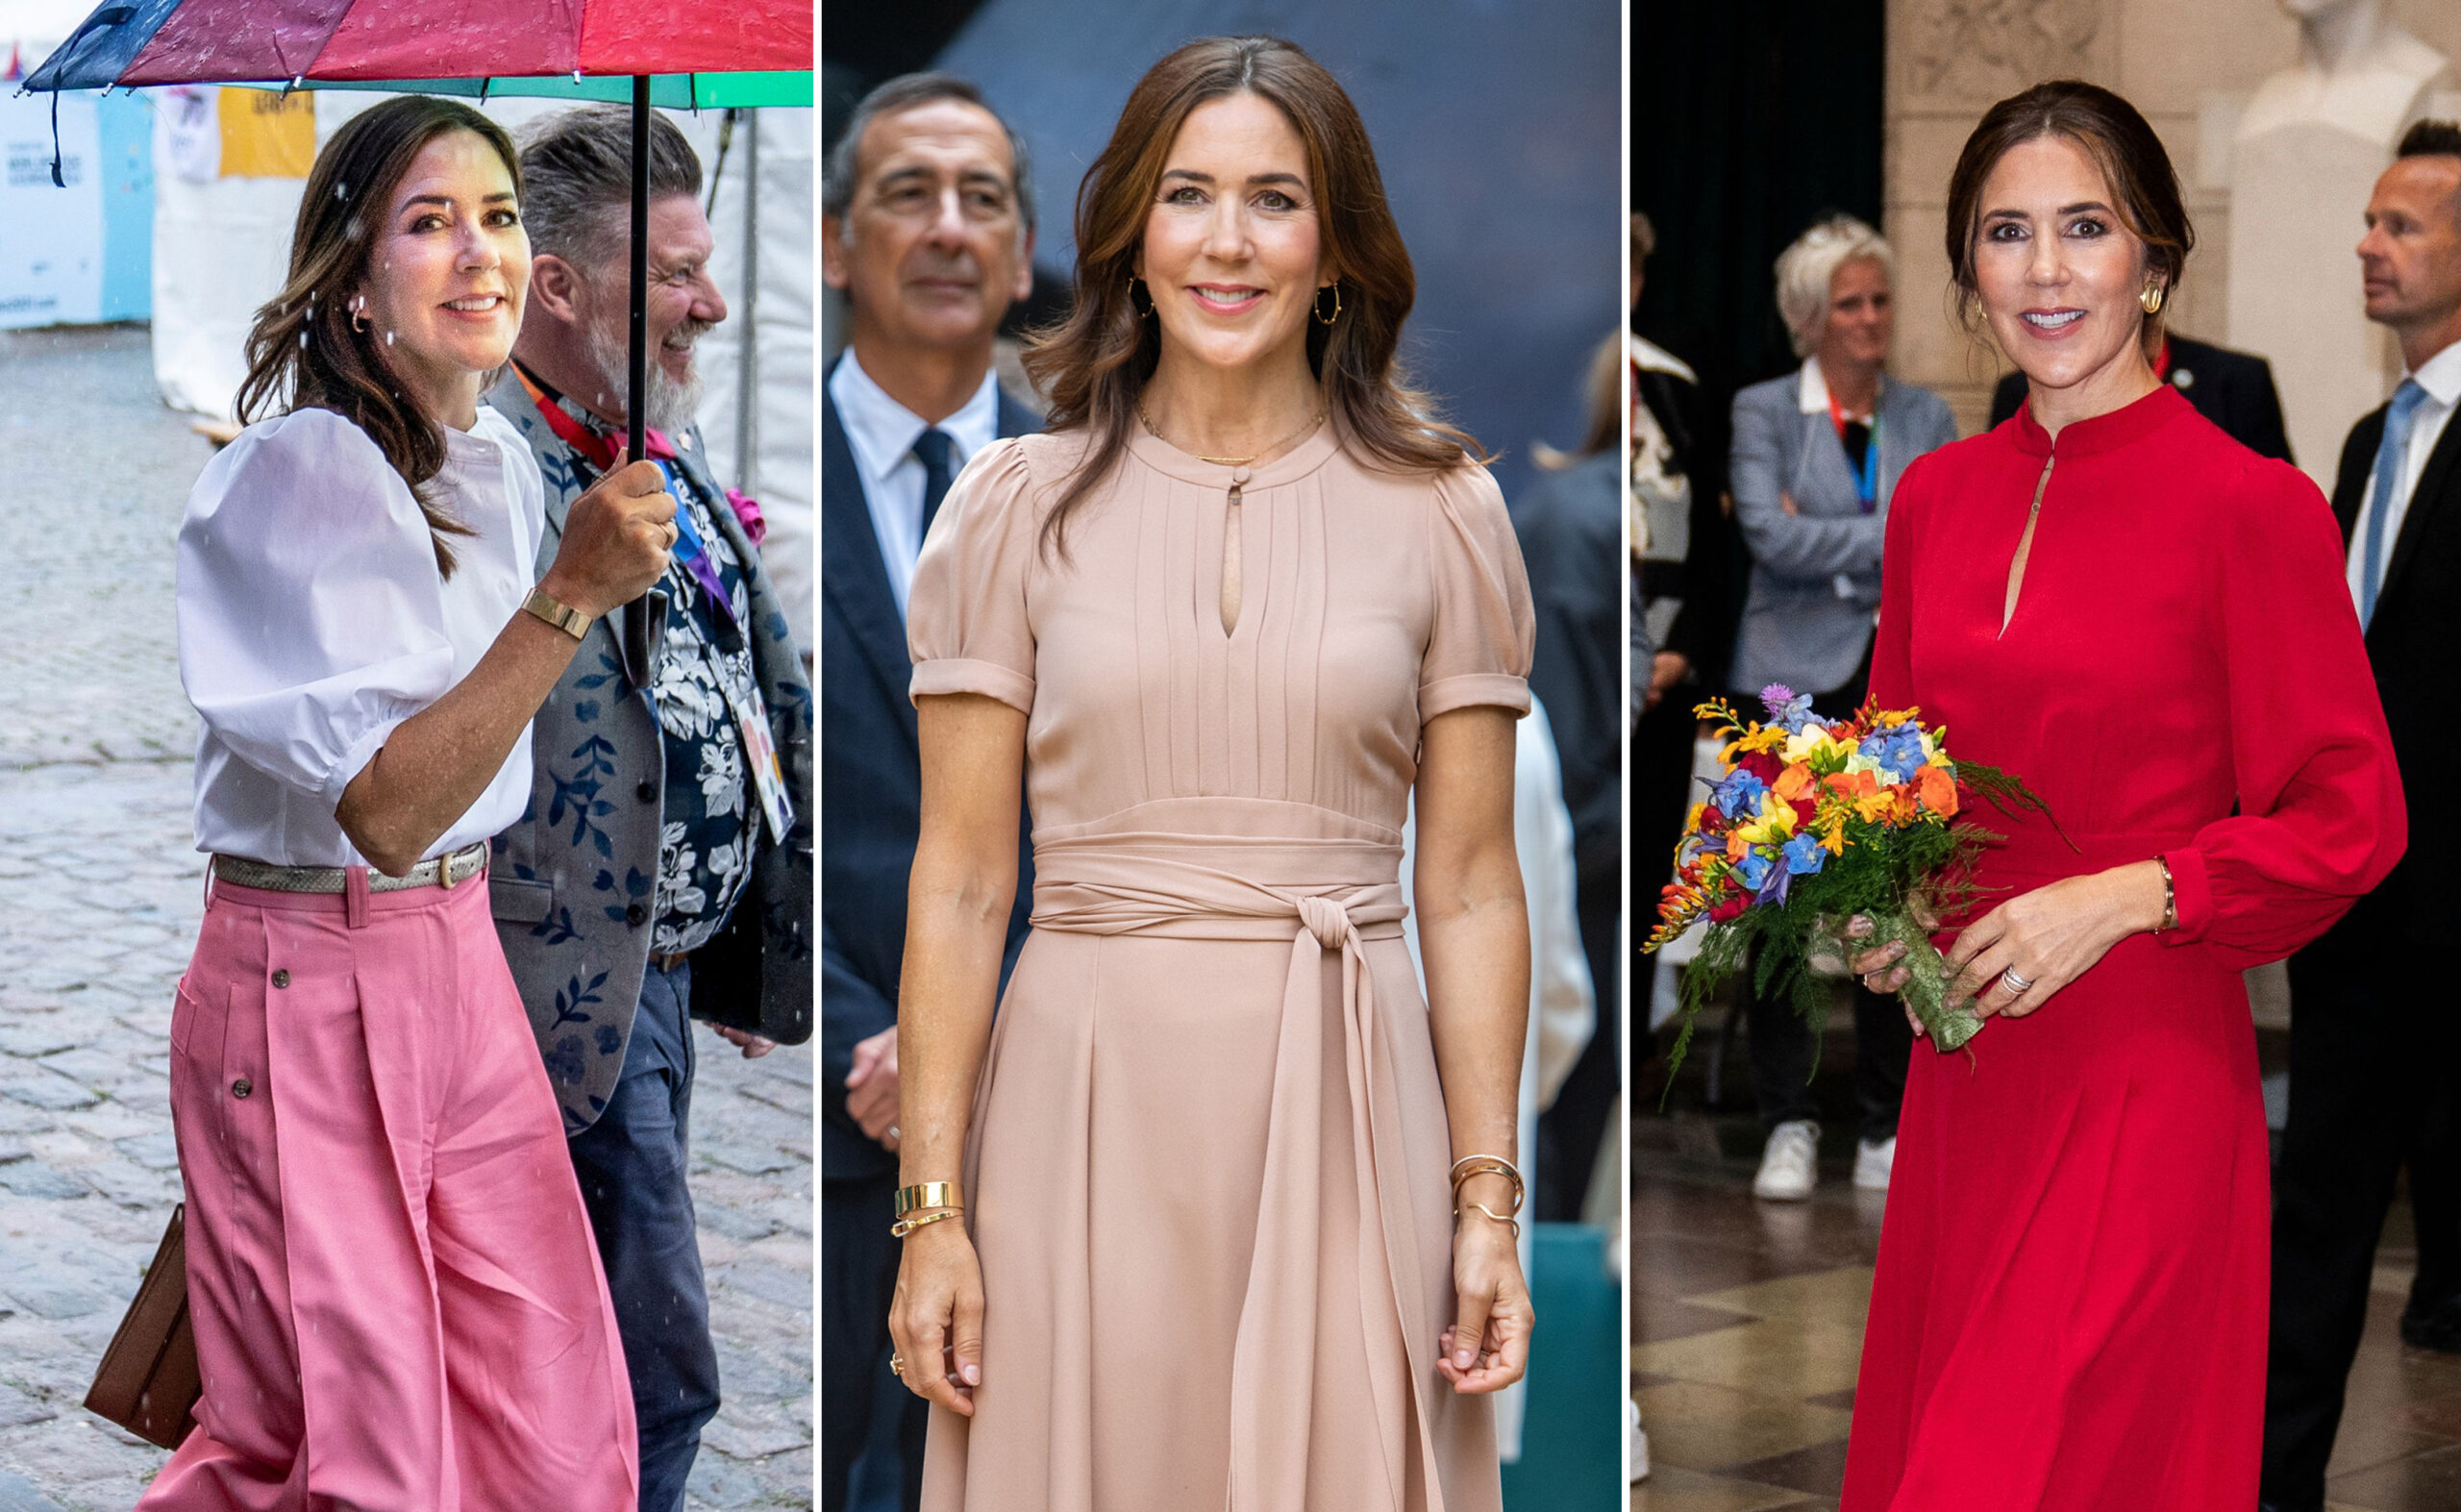 In honour of Crown Princess Mary’s versatile royal wardrobe, we’re counting down her top 10 best fashion moments in 2021